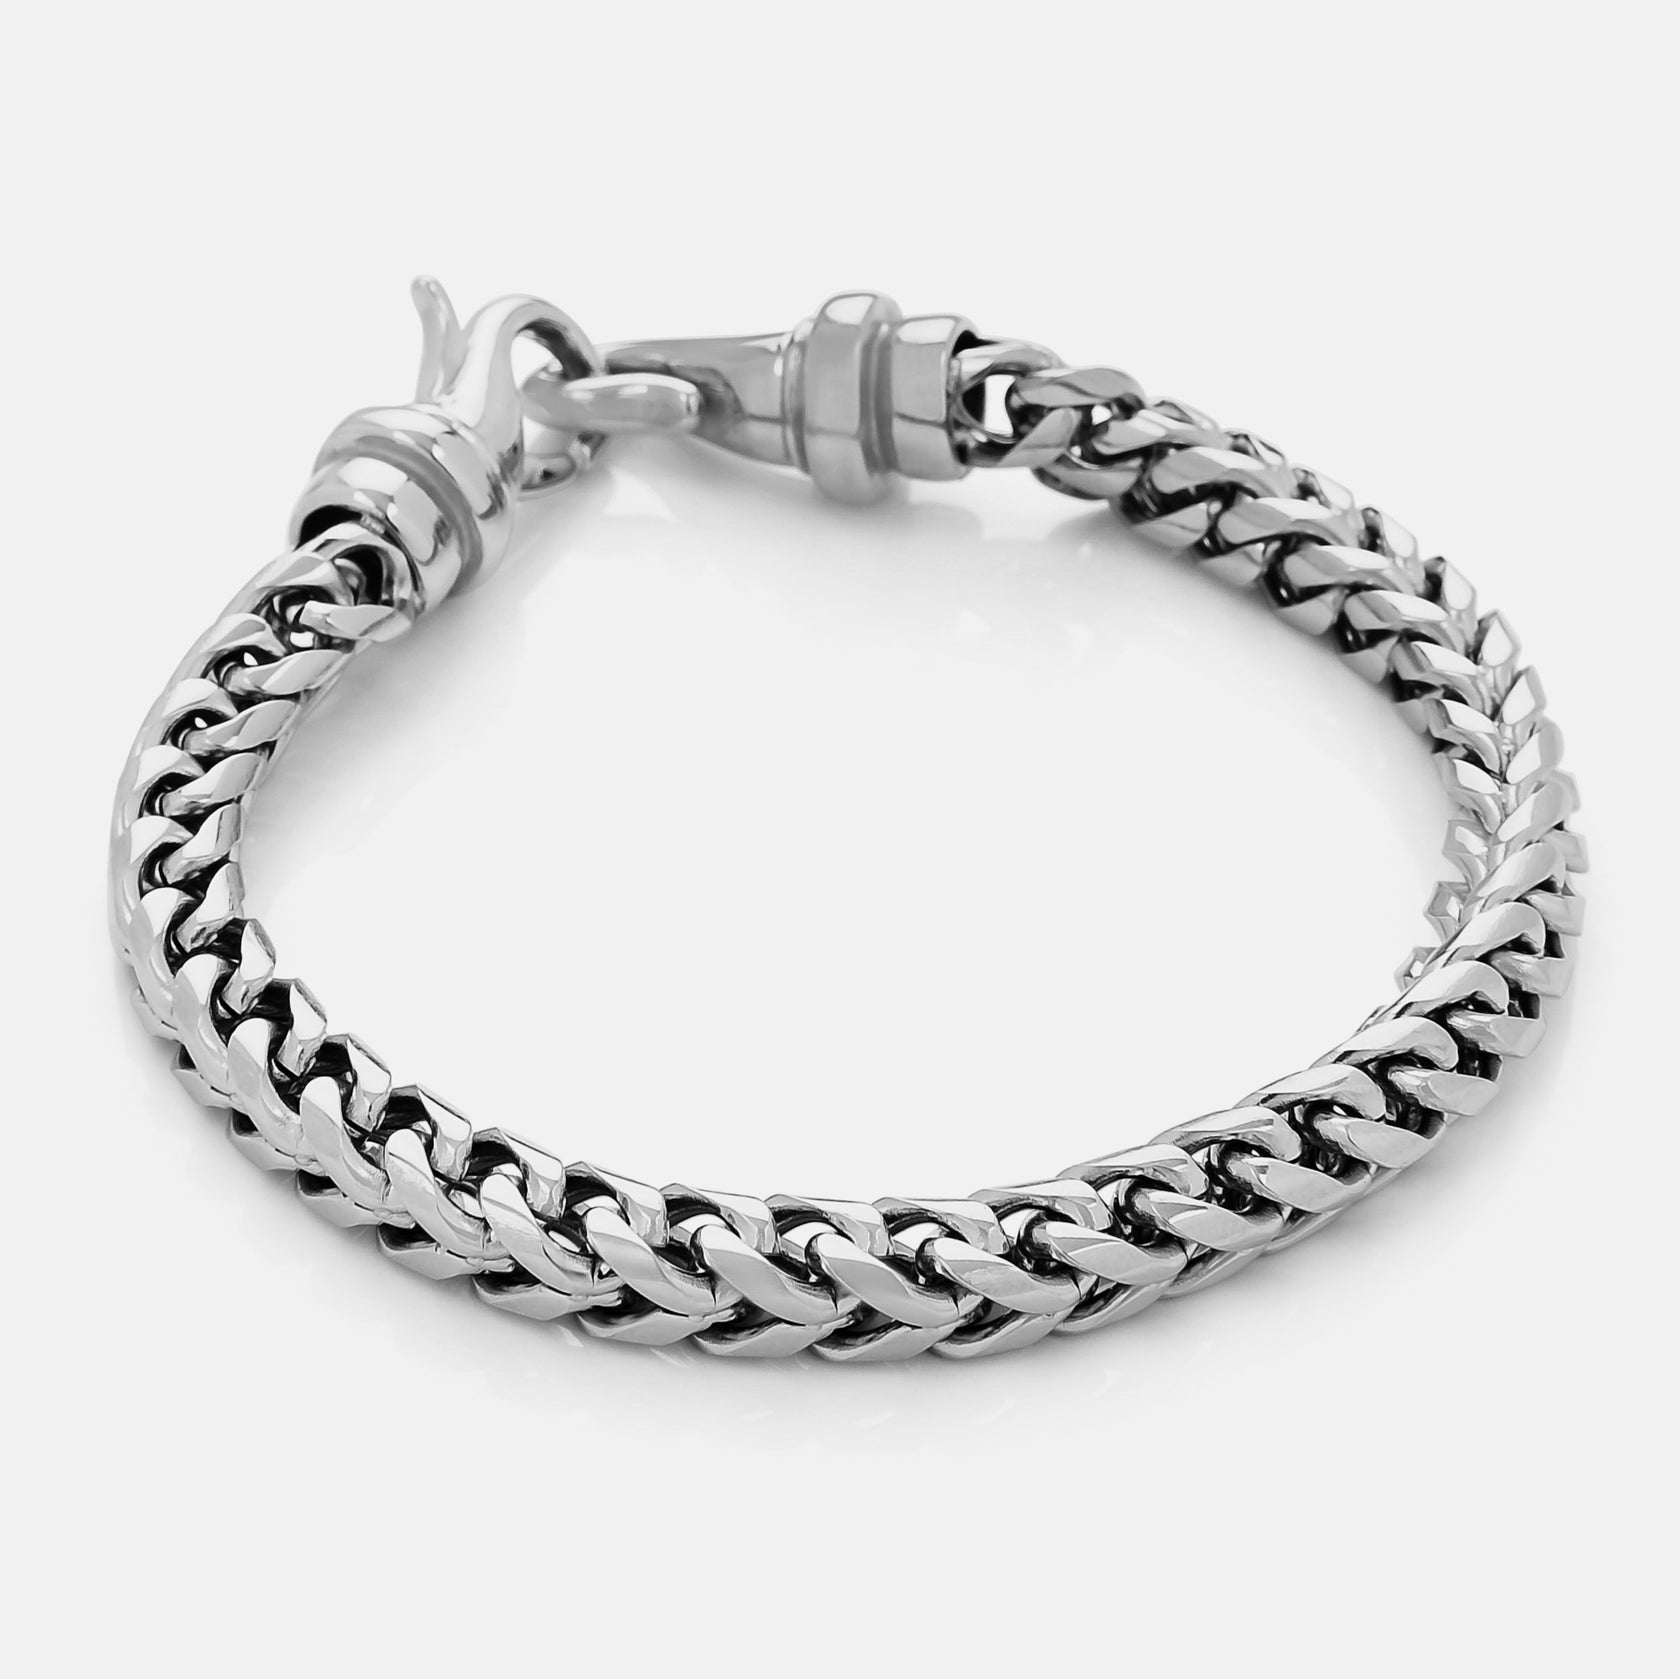 Vitaly Kusari Bracelet | 100% Recycled Stainless Steel Accessories